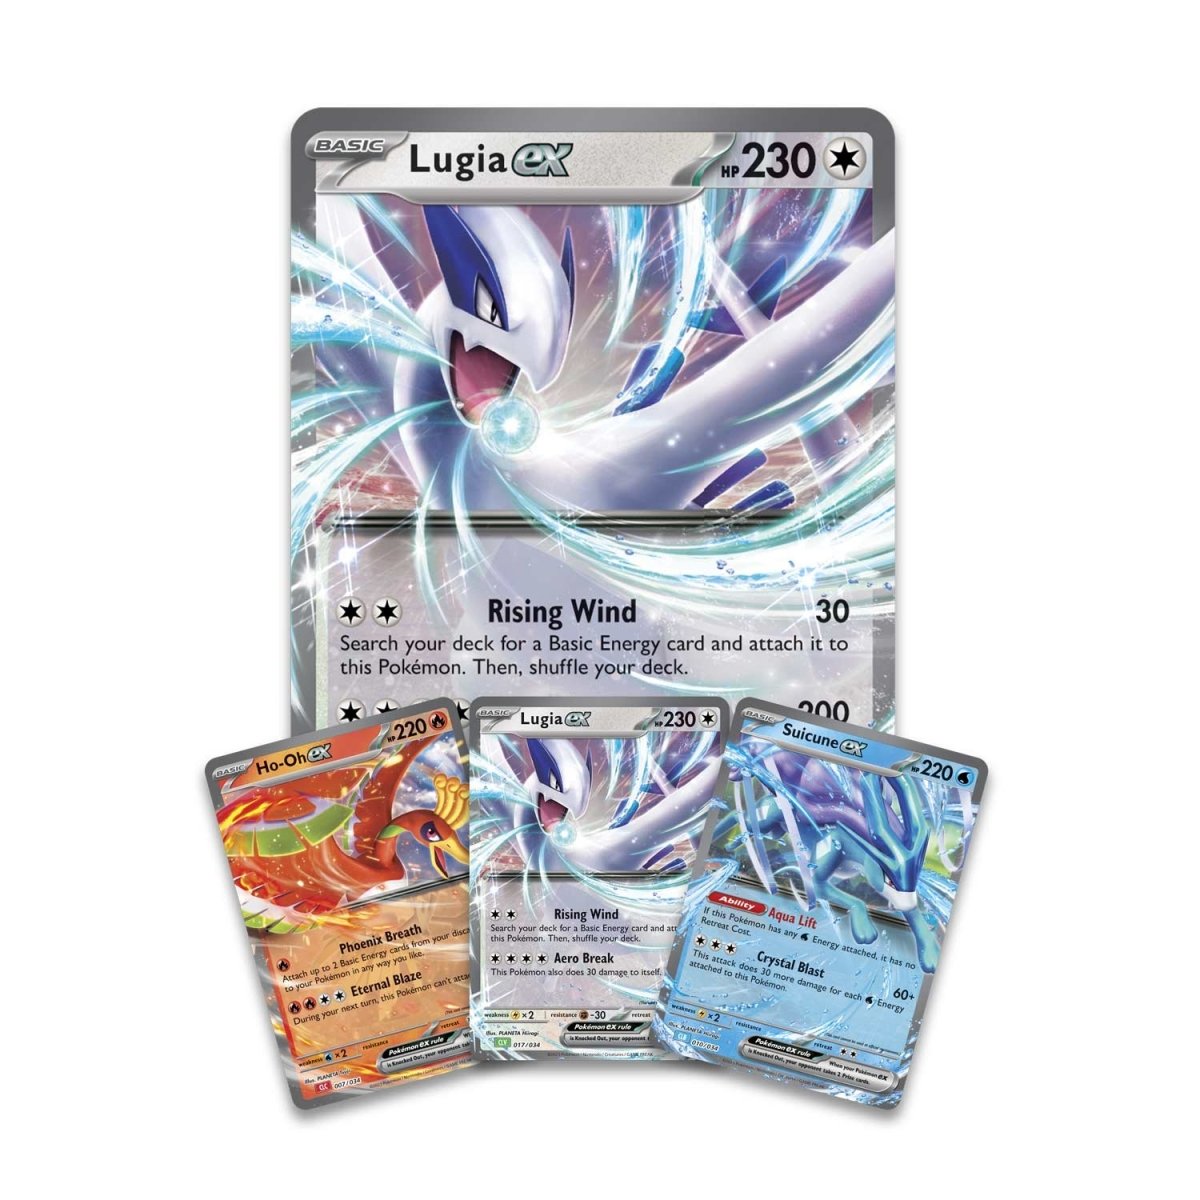 Pokemon TCG: Combined Powers Premium Collection-The Pokémon Company International-Ace Cards &amp; Collectibles